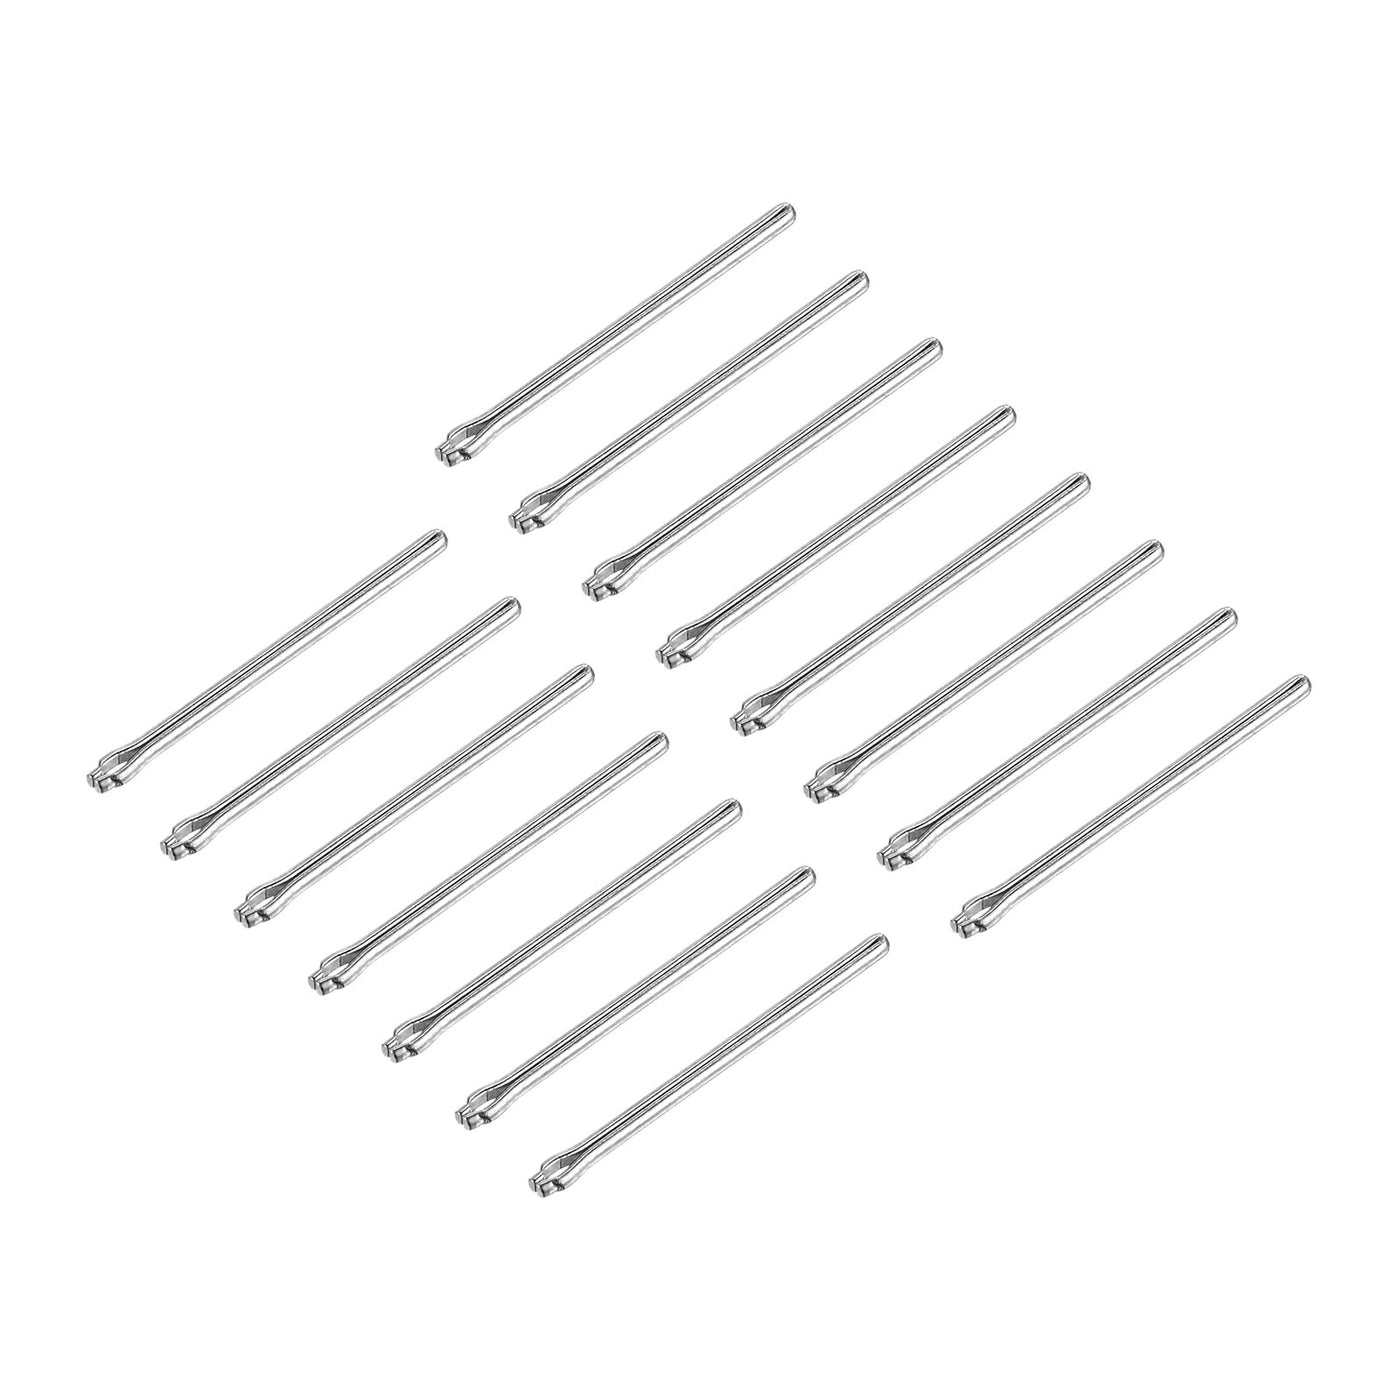 Uxcell Uxcell 15Pcs 15mm Watch Band Link Cotter Pin, Stainless Steel 0.9mm Dia. Silver Tone